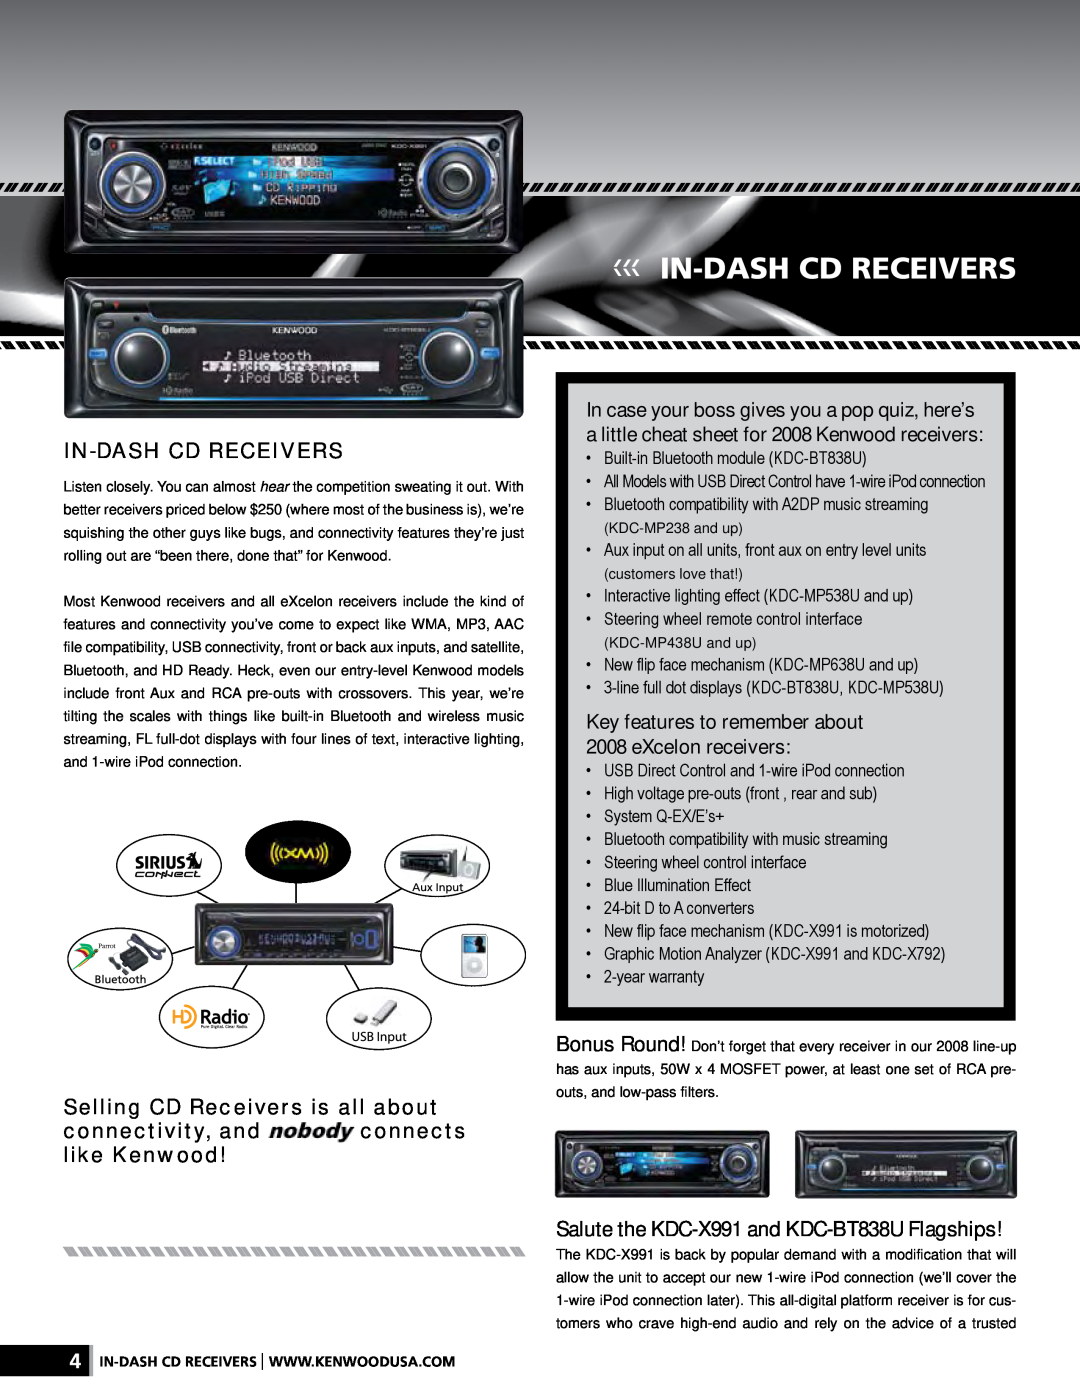 Kenwood XR-S17P In-Dashcd Receivers, Key features to remember about, eXcelon receivers, Selling CD Receivers is all about 